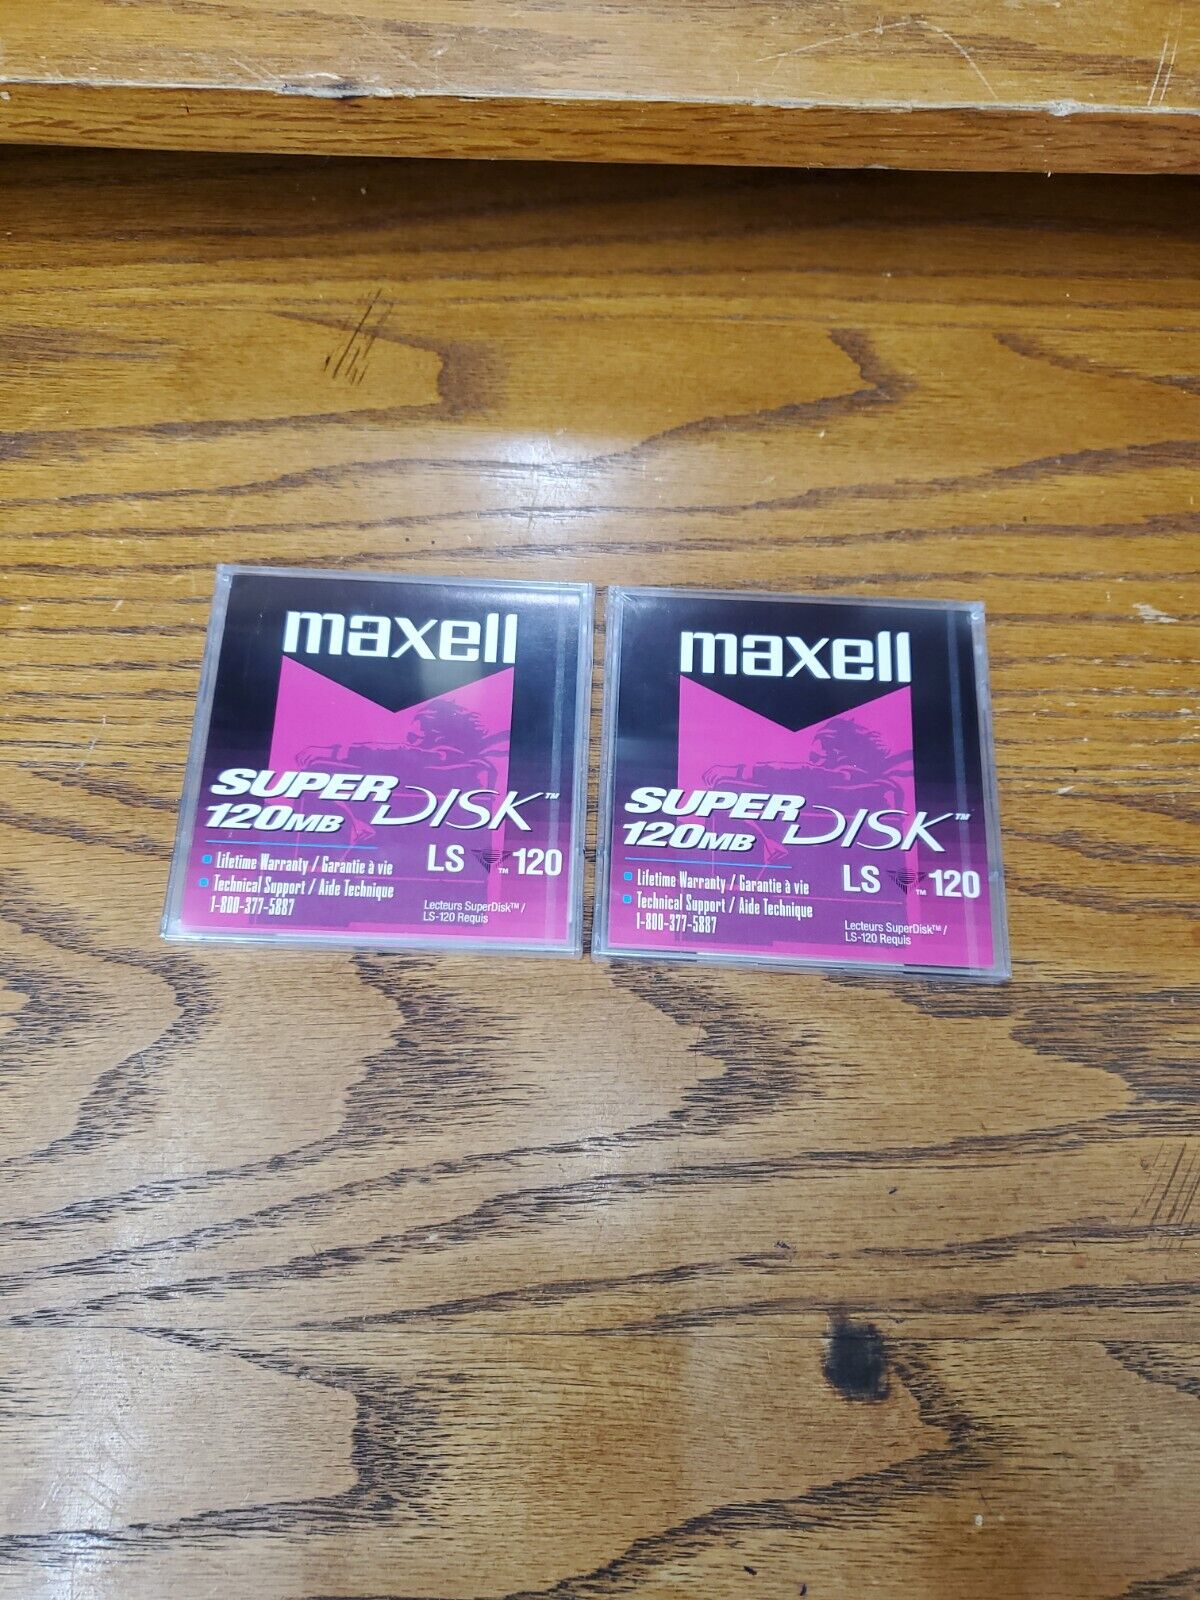 Maxell 120mg Superdisc - Brand New - Unopened package - Lot of 2